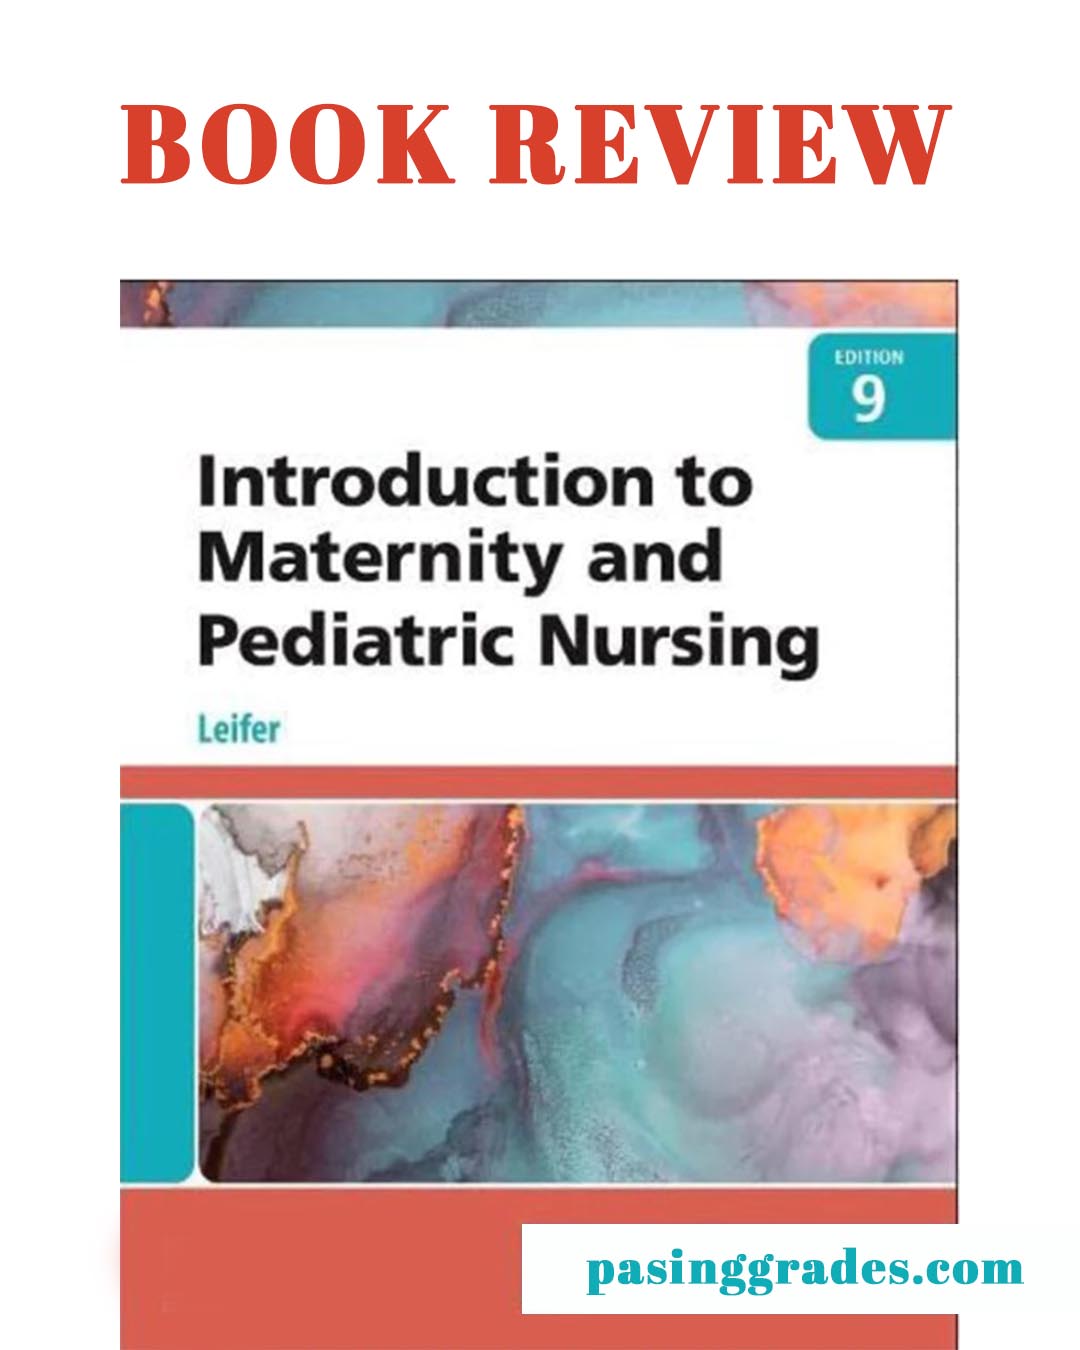 Book Review: Introduction to Maternity and Pediatric Nursing, 9th Edition Authored by Gloria Leifer